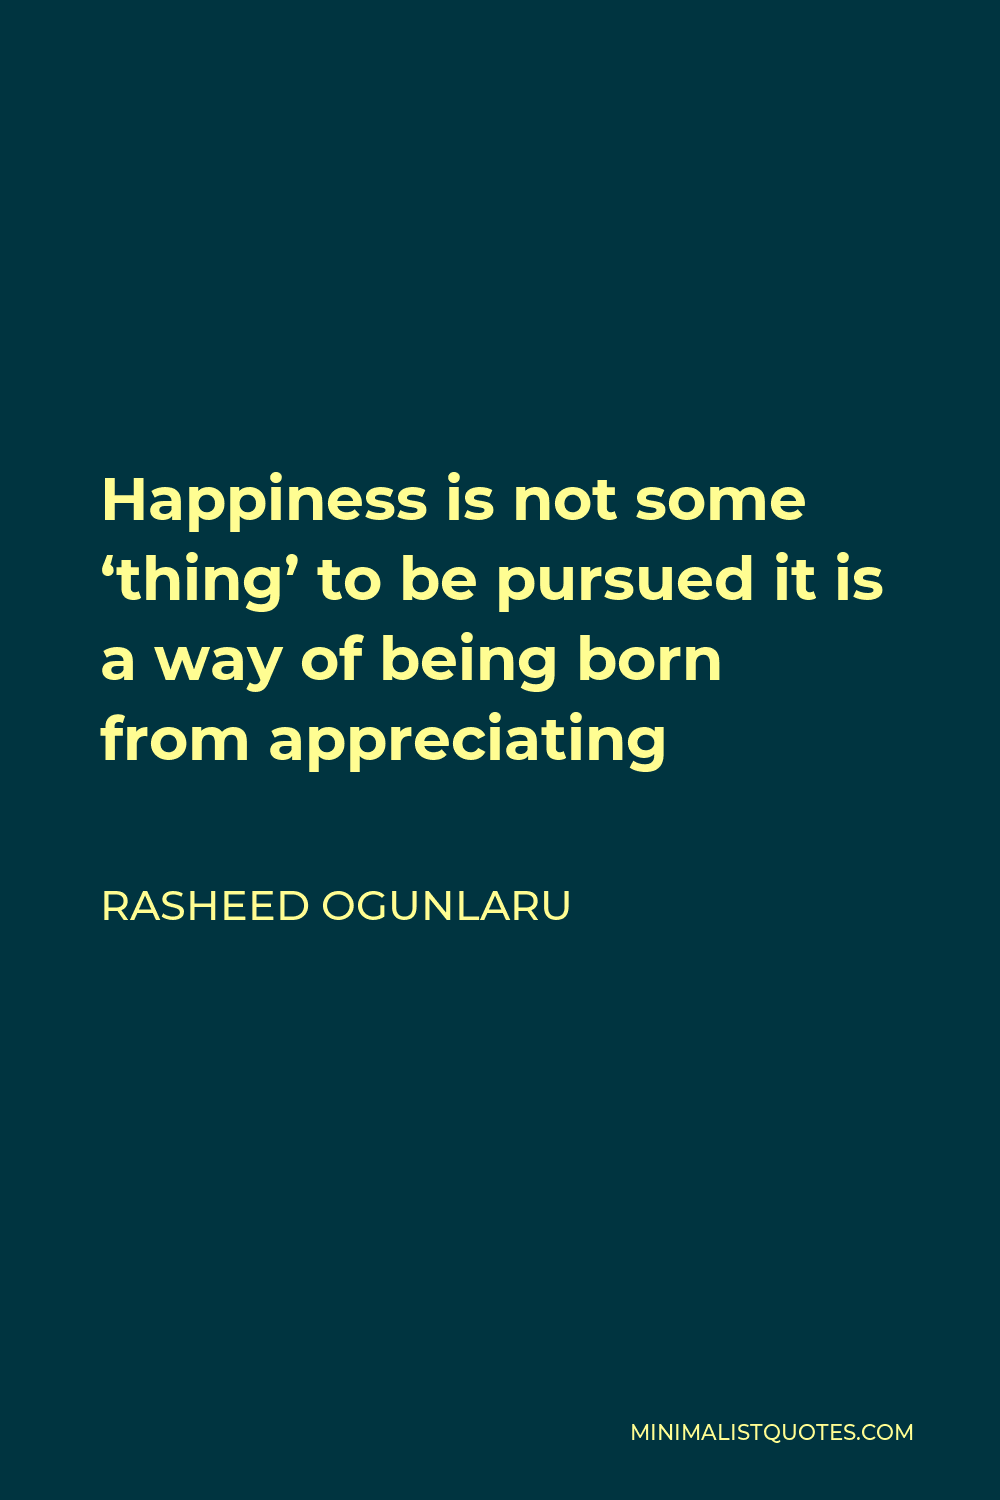 Rasheed Ogunlaru Quote - Happiness is not some ‘thing’ to be pursued it is a way of being born from appreciating